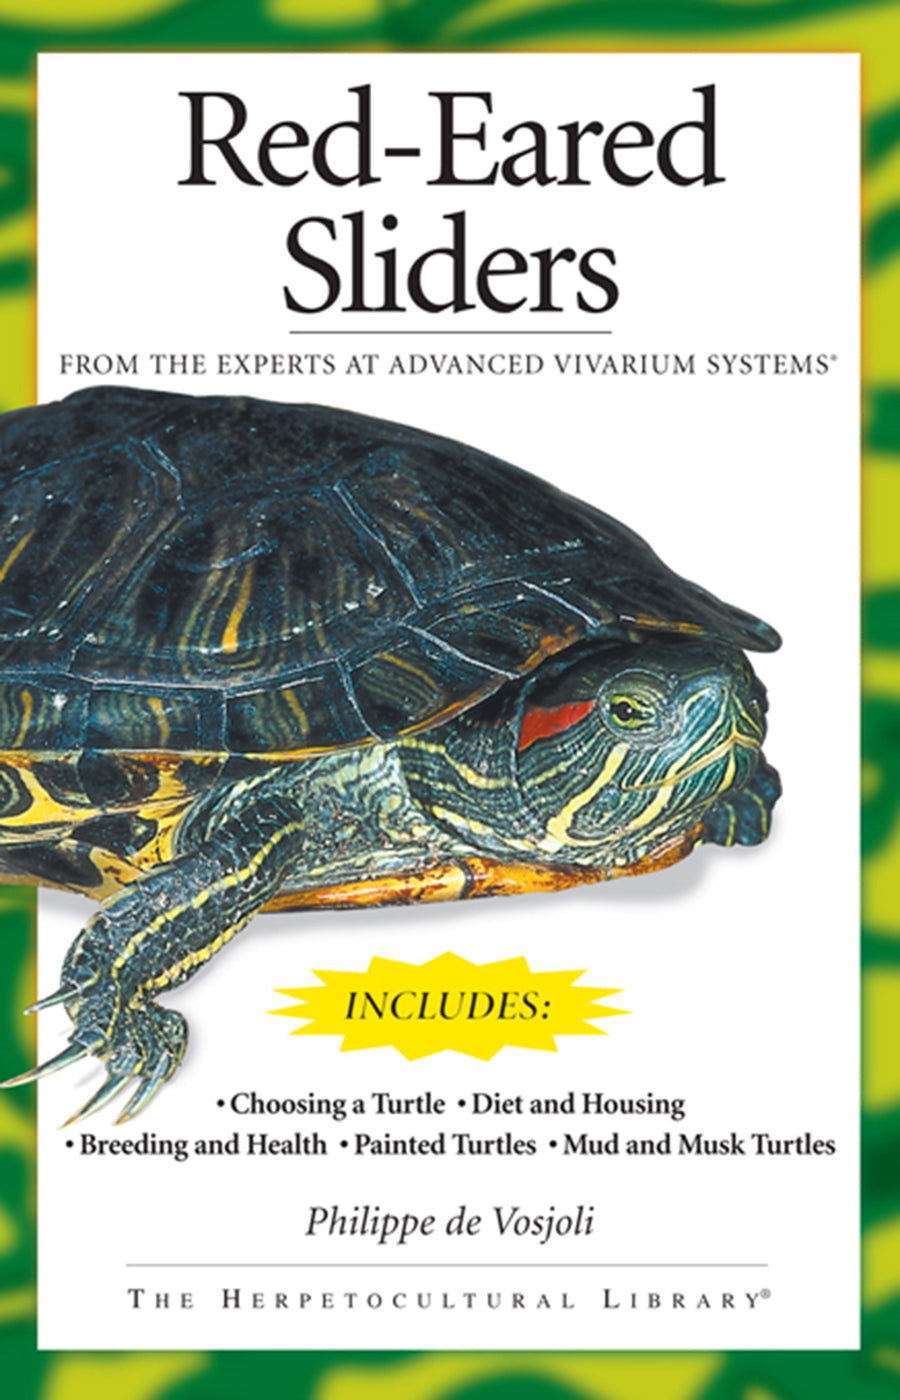 Red-Eared Sliders Paperback Publication: 2002/12/01